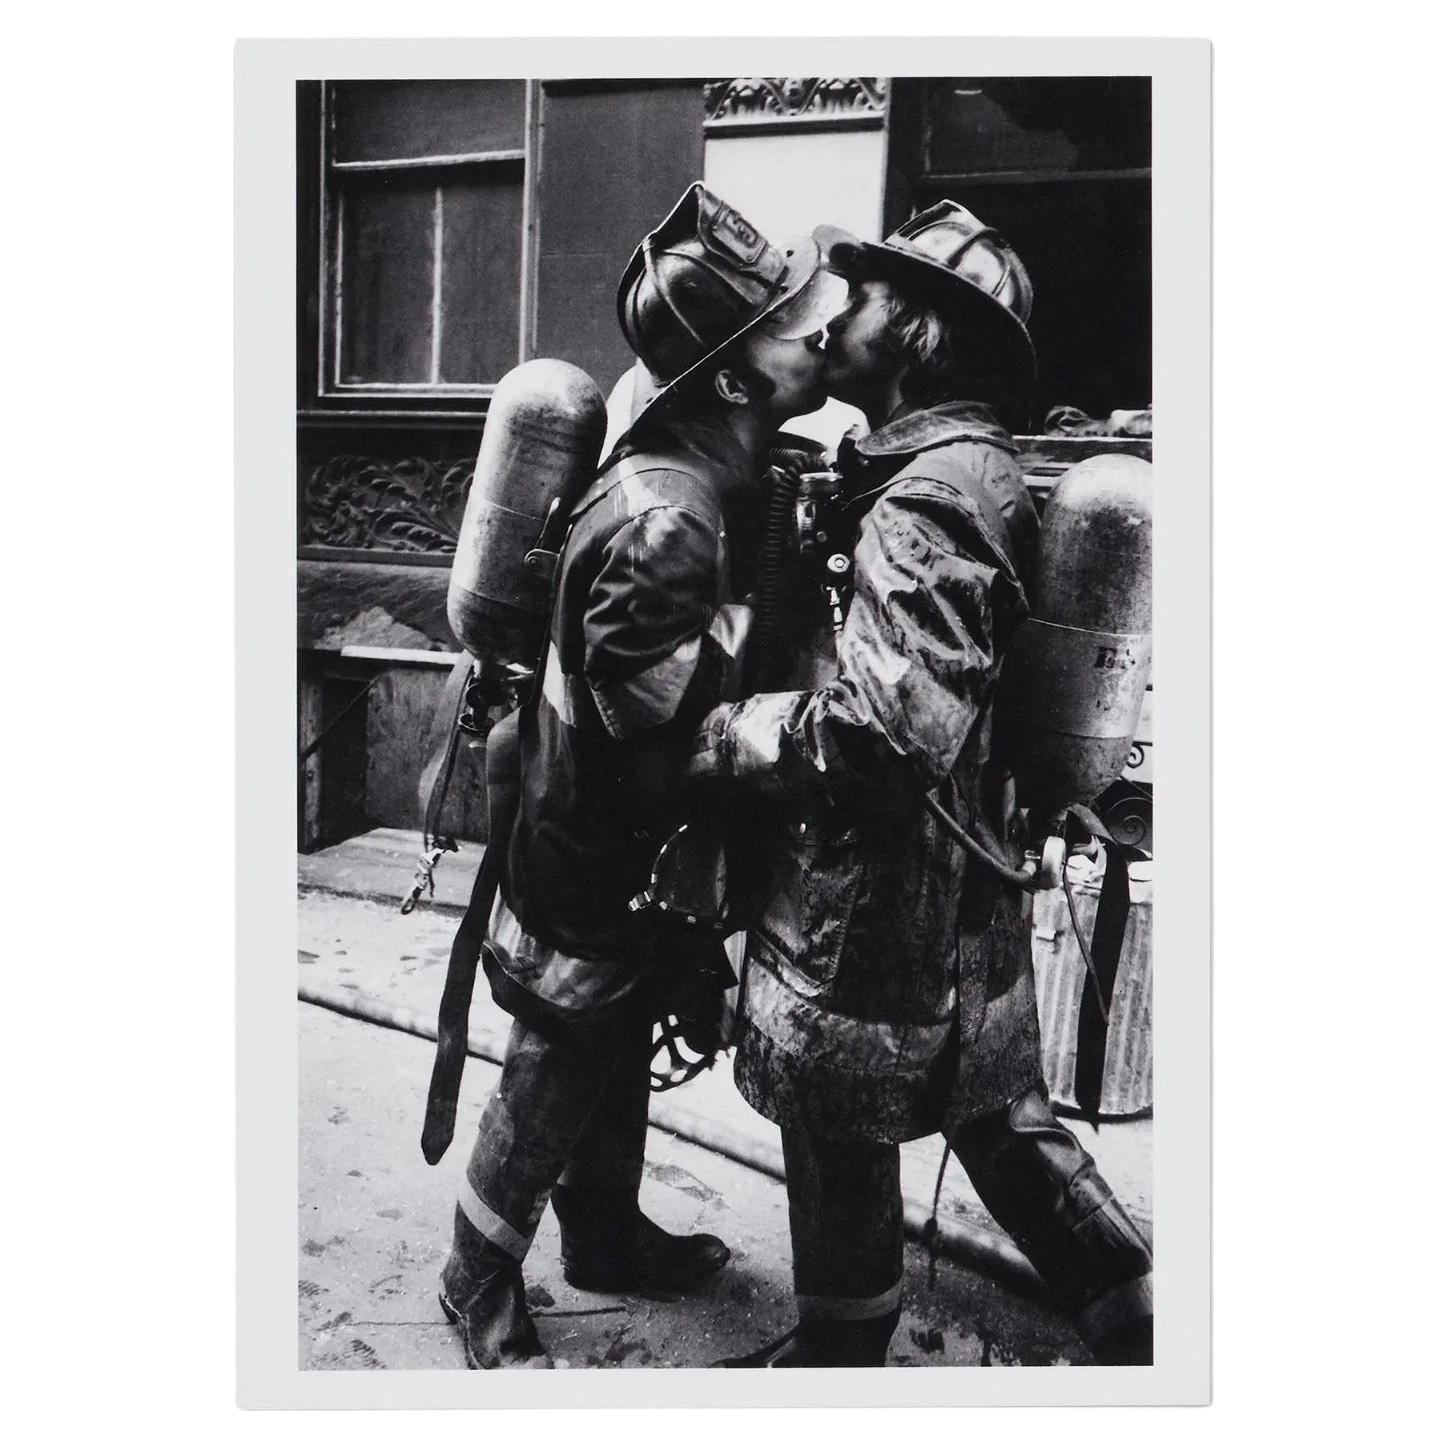 Jill Freedman Kissing FDNY 1976, black & white photo on Kodak Endura, Signed. Image also known as ‘Brotherly Love.” This is a black and white photograph on Kodak Endura, handsigned by the artist. 7 x 5 inches. Unframed. 
Jill Freedman (October 19,